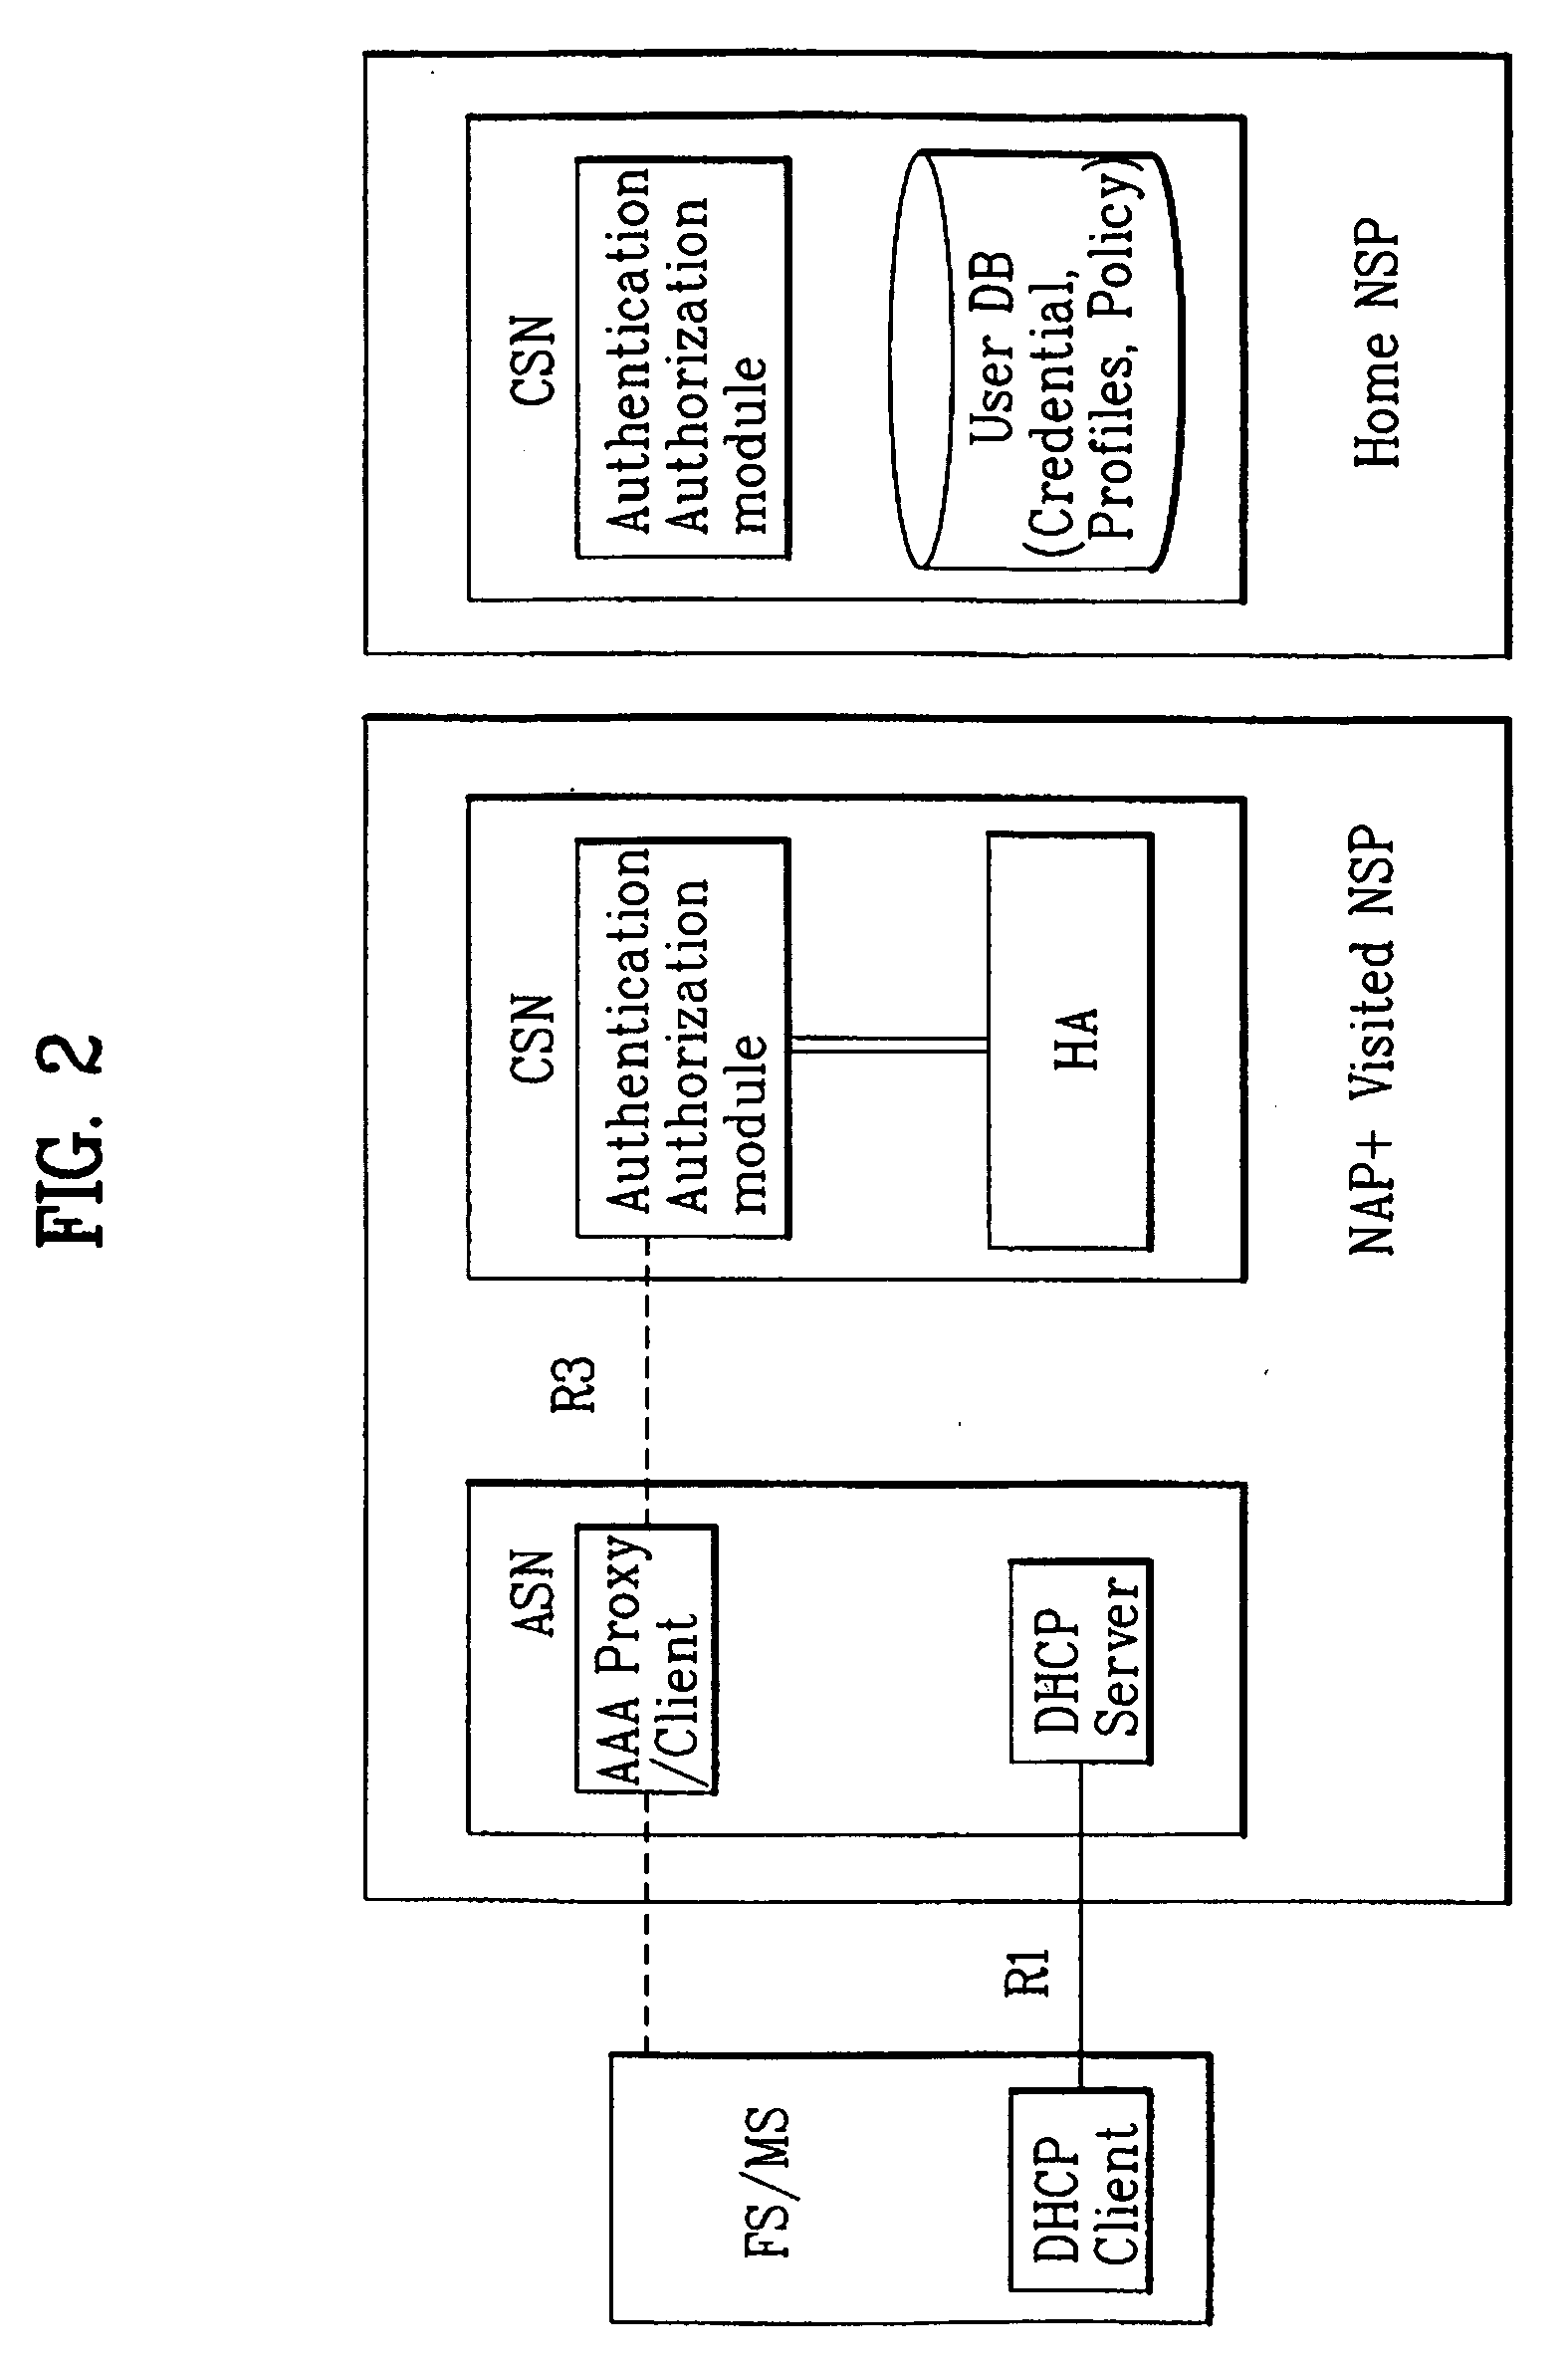 Method of allocating an internet protocol address in a broadband wireless access system